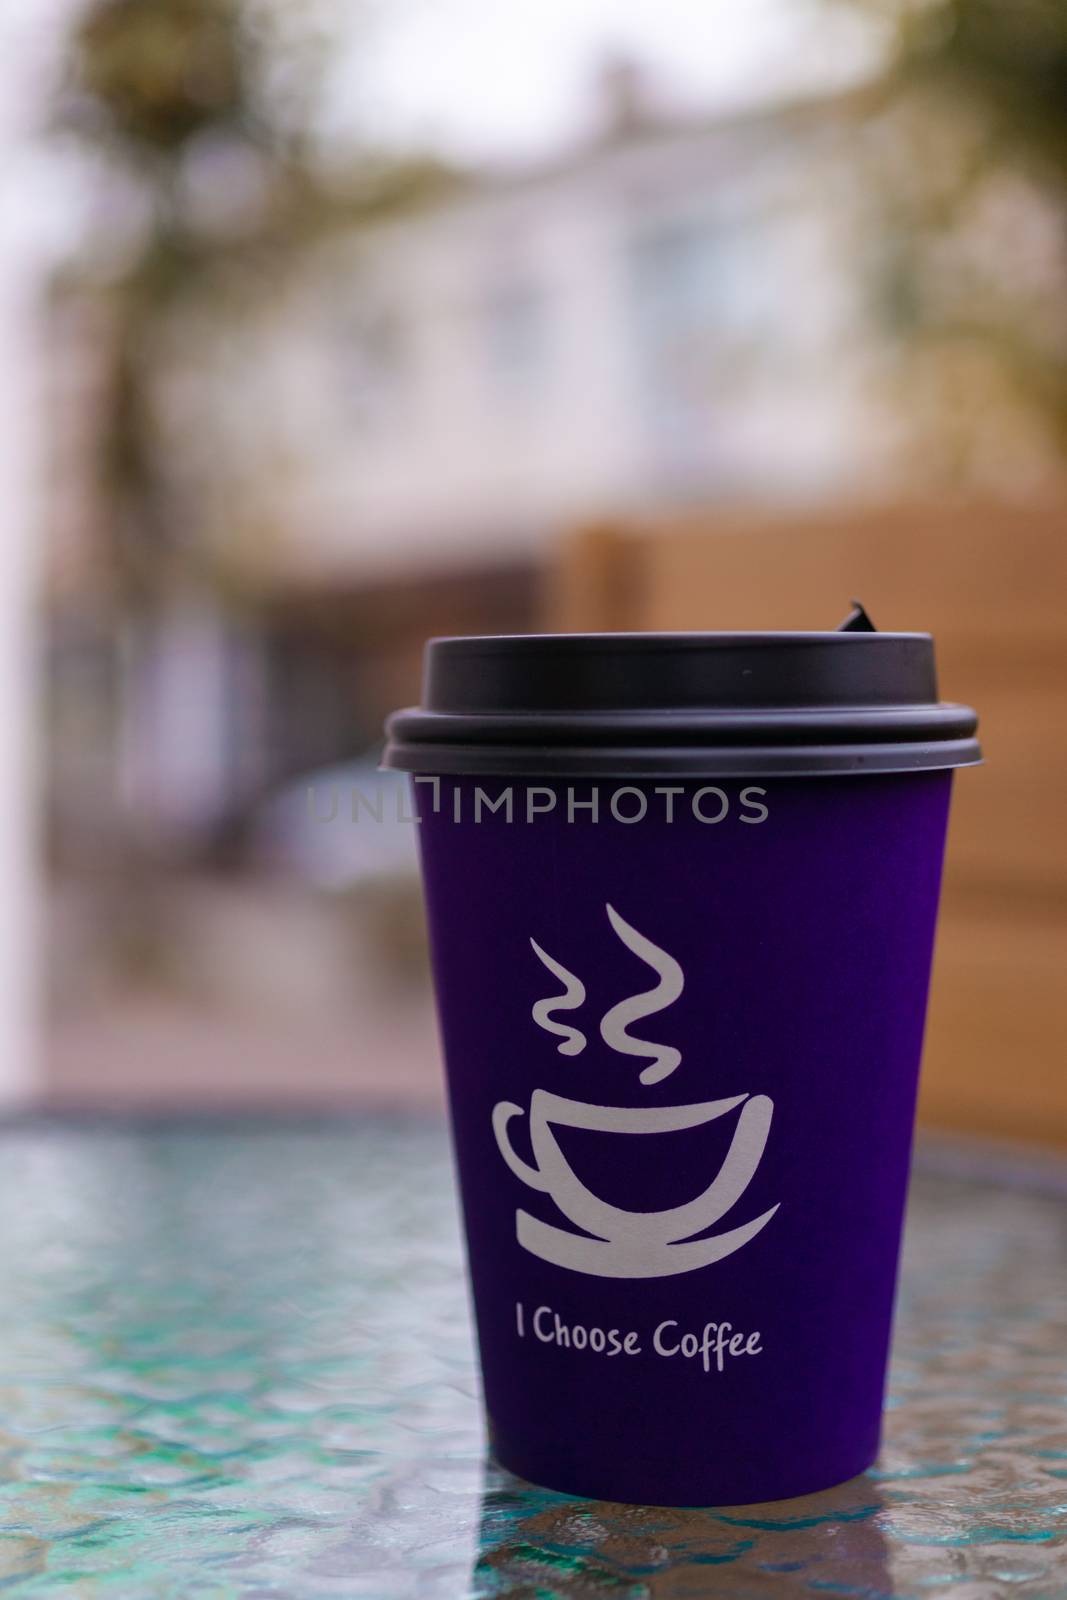 Purple coffee paper cup on glass clear table. On cup wrote: "I choose coffee". Beginning a good day!